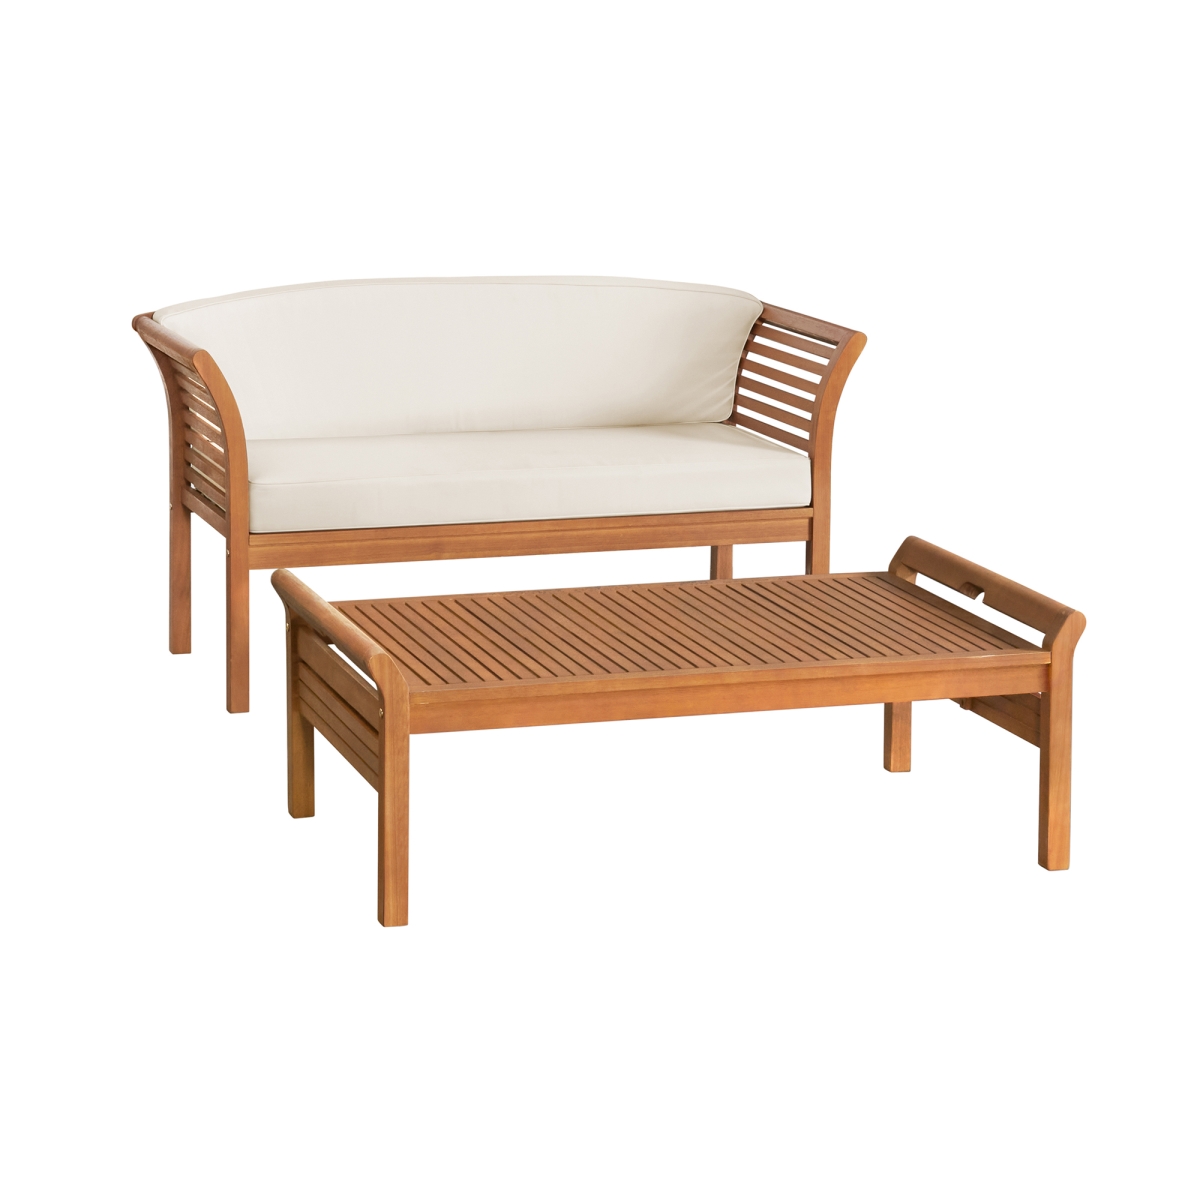 Picture of Alaterre ANSF023EBO Stamford Eucalyptus Wood Outdoor Bench with Coffee Table - Set of 2